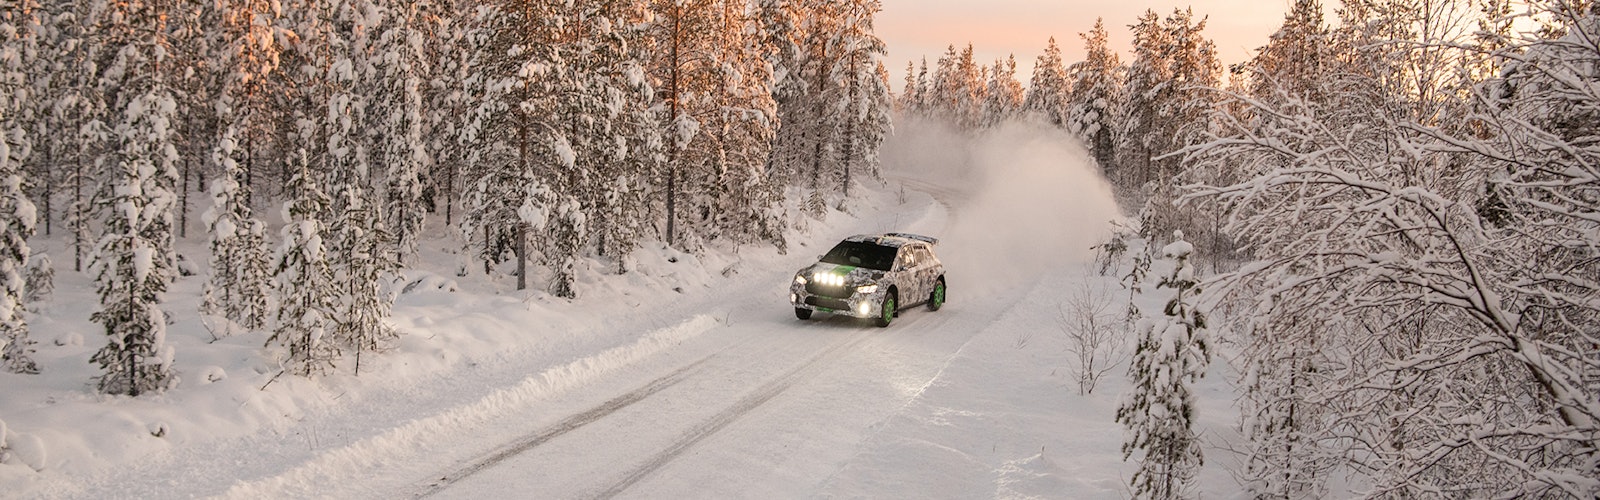 220217-SKODA-FABIA-Rally2-proves-itself-during-extreme-winter-test-2